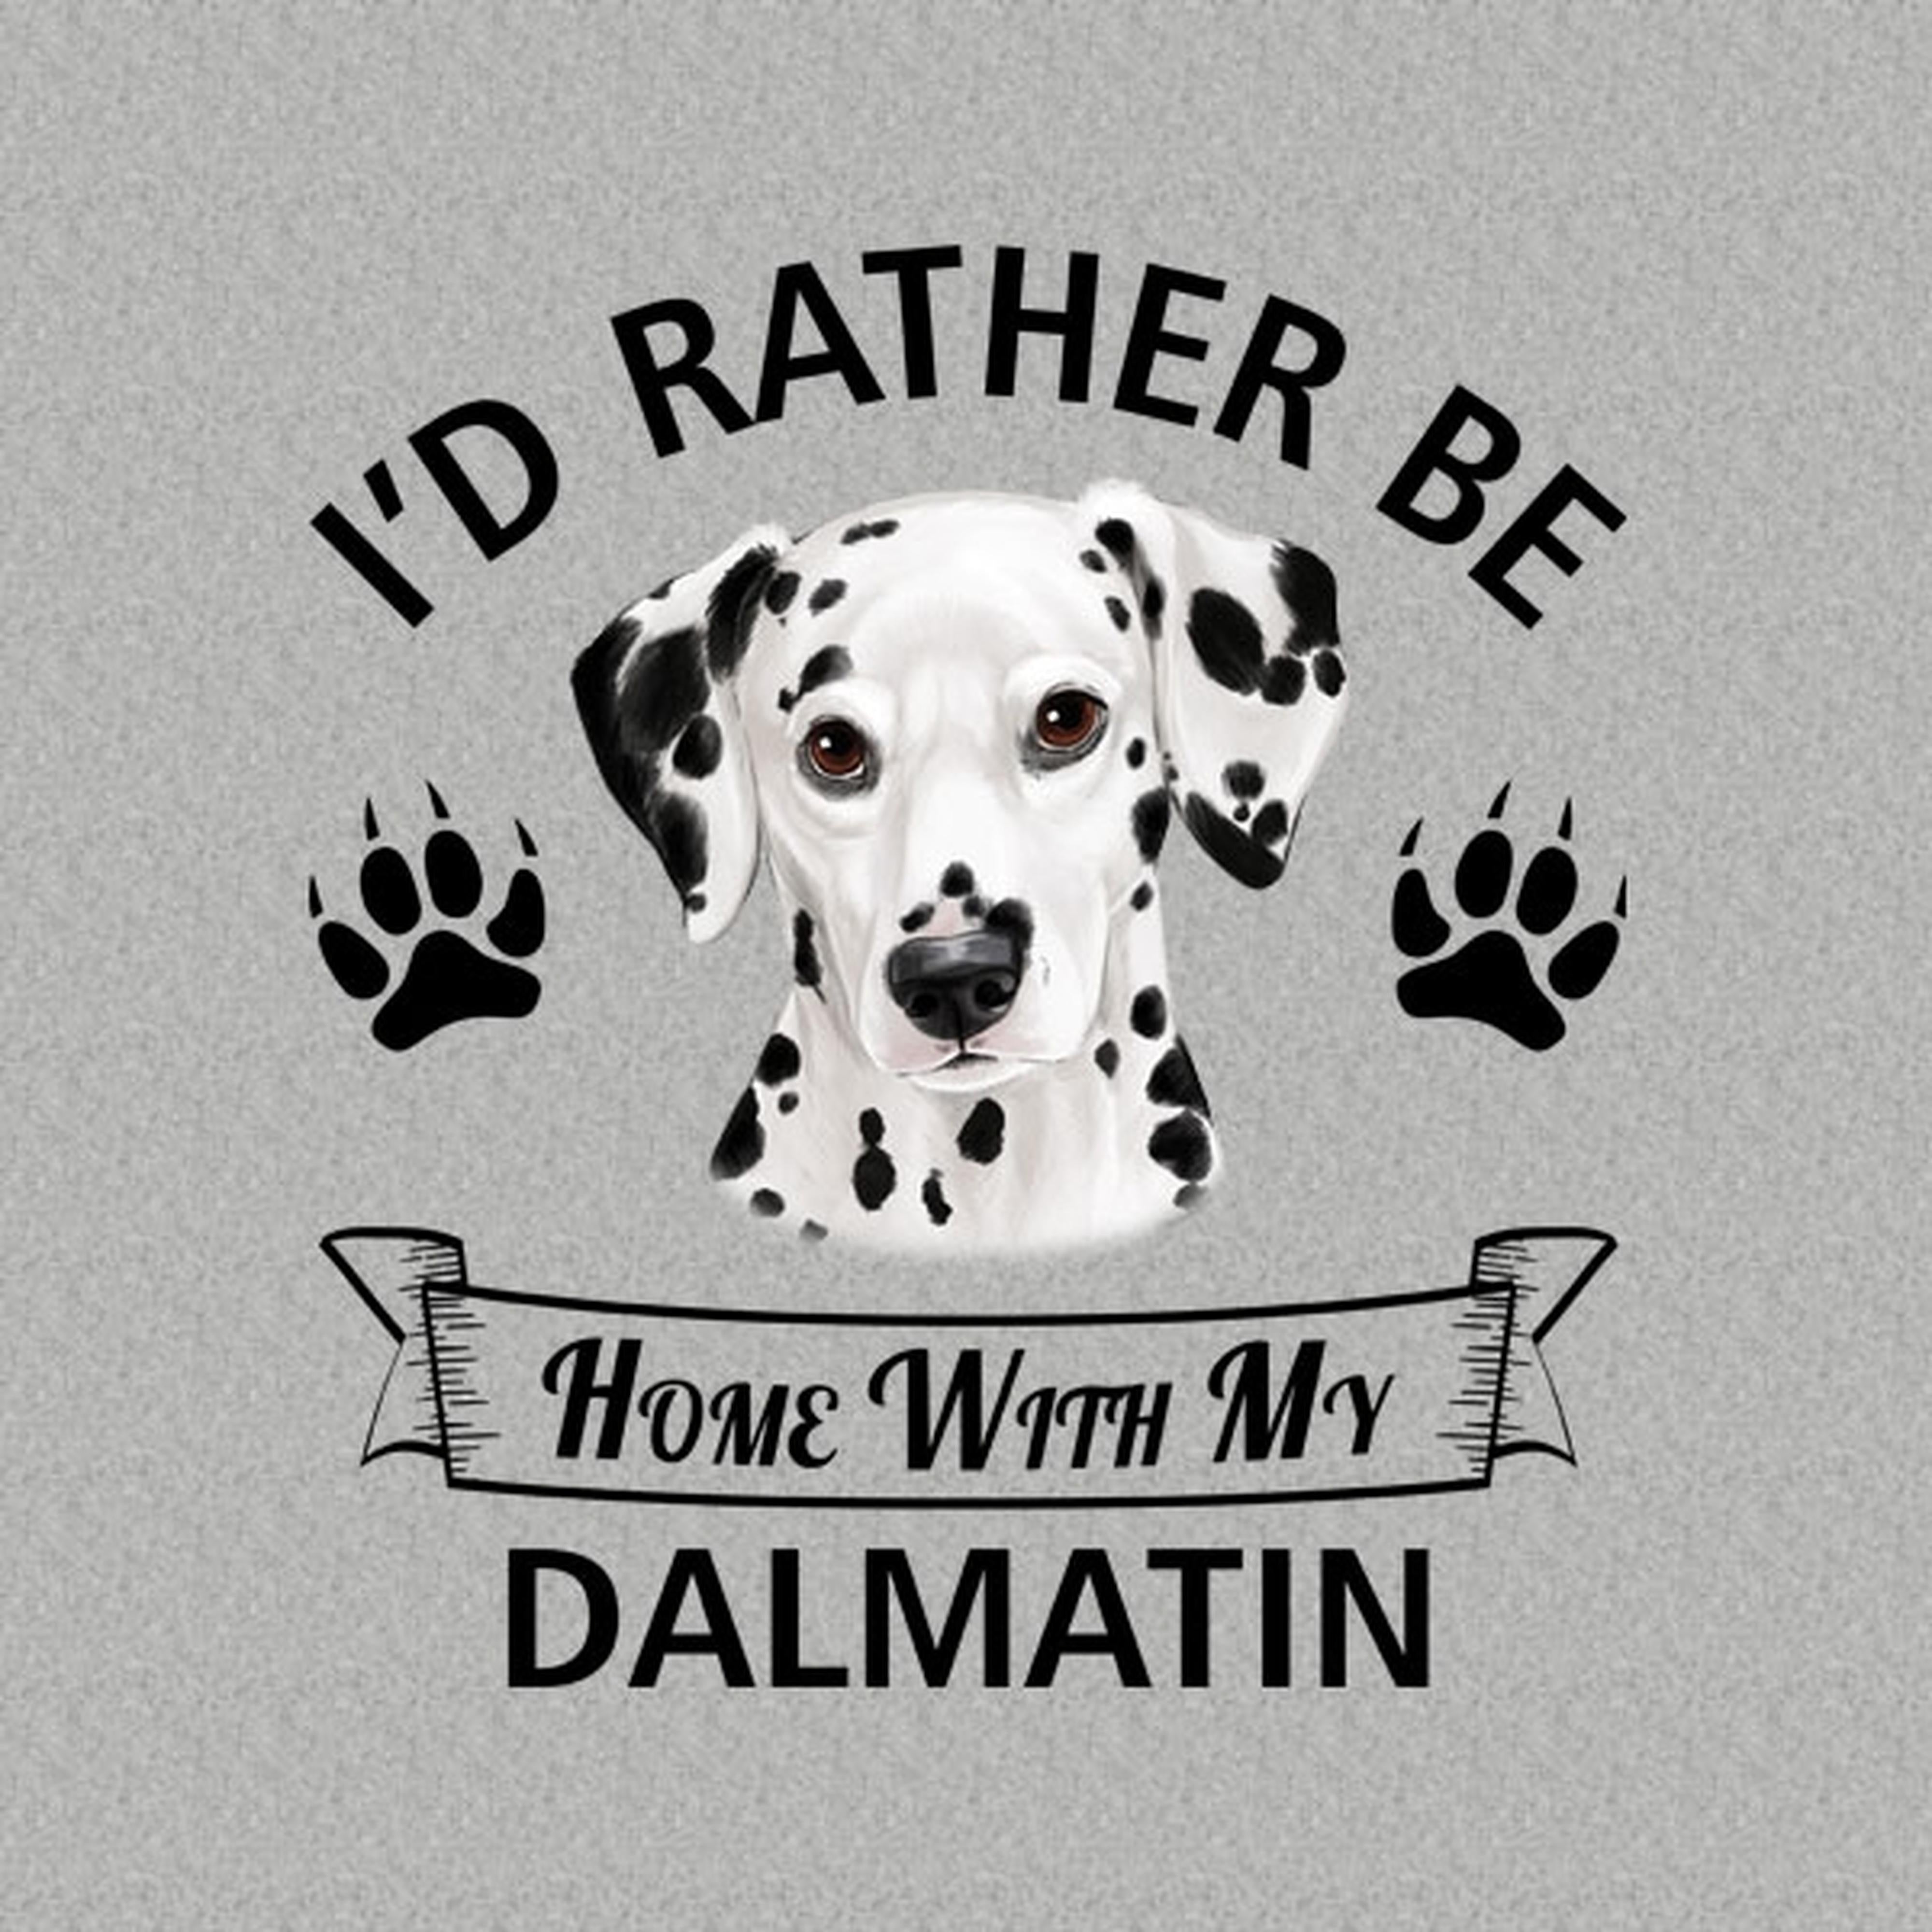 I'd rather stay home with my Dalmatian - T-shirt